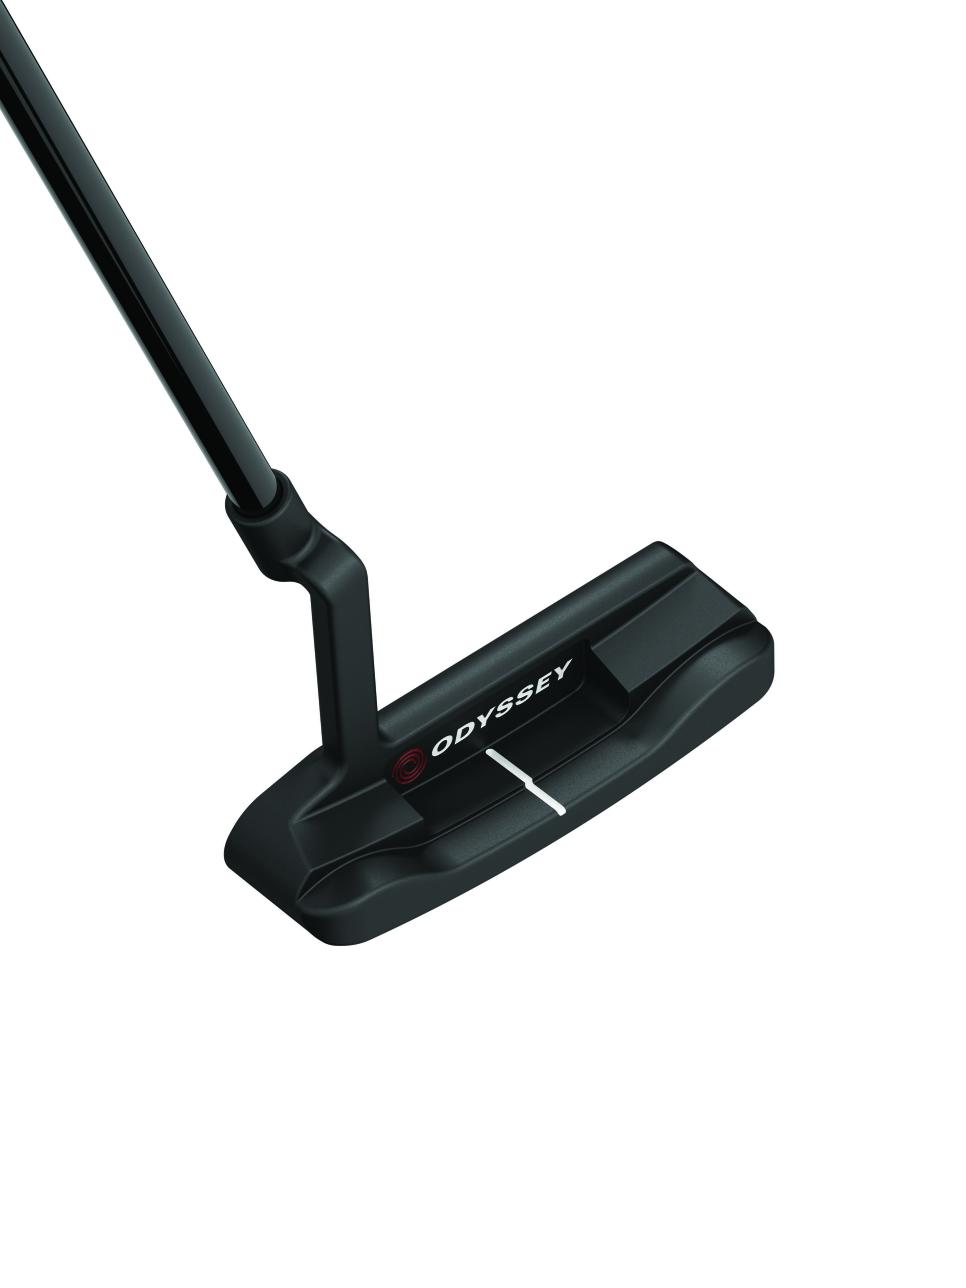 new-odyssey-o-works-putters-now-feature-black-and-red-models-golf-equipment-clubs-balls